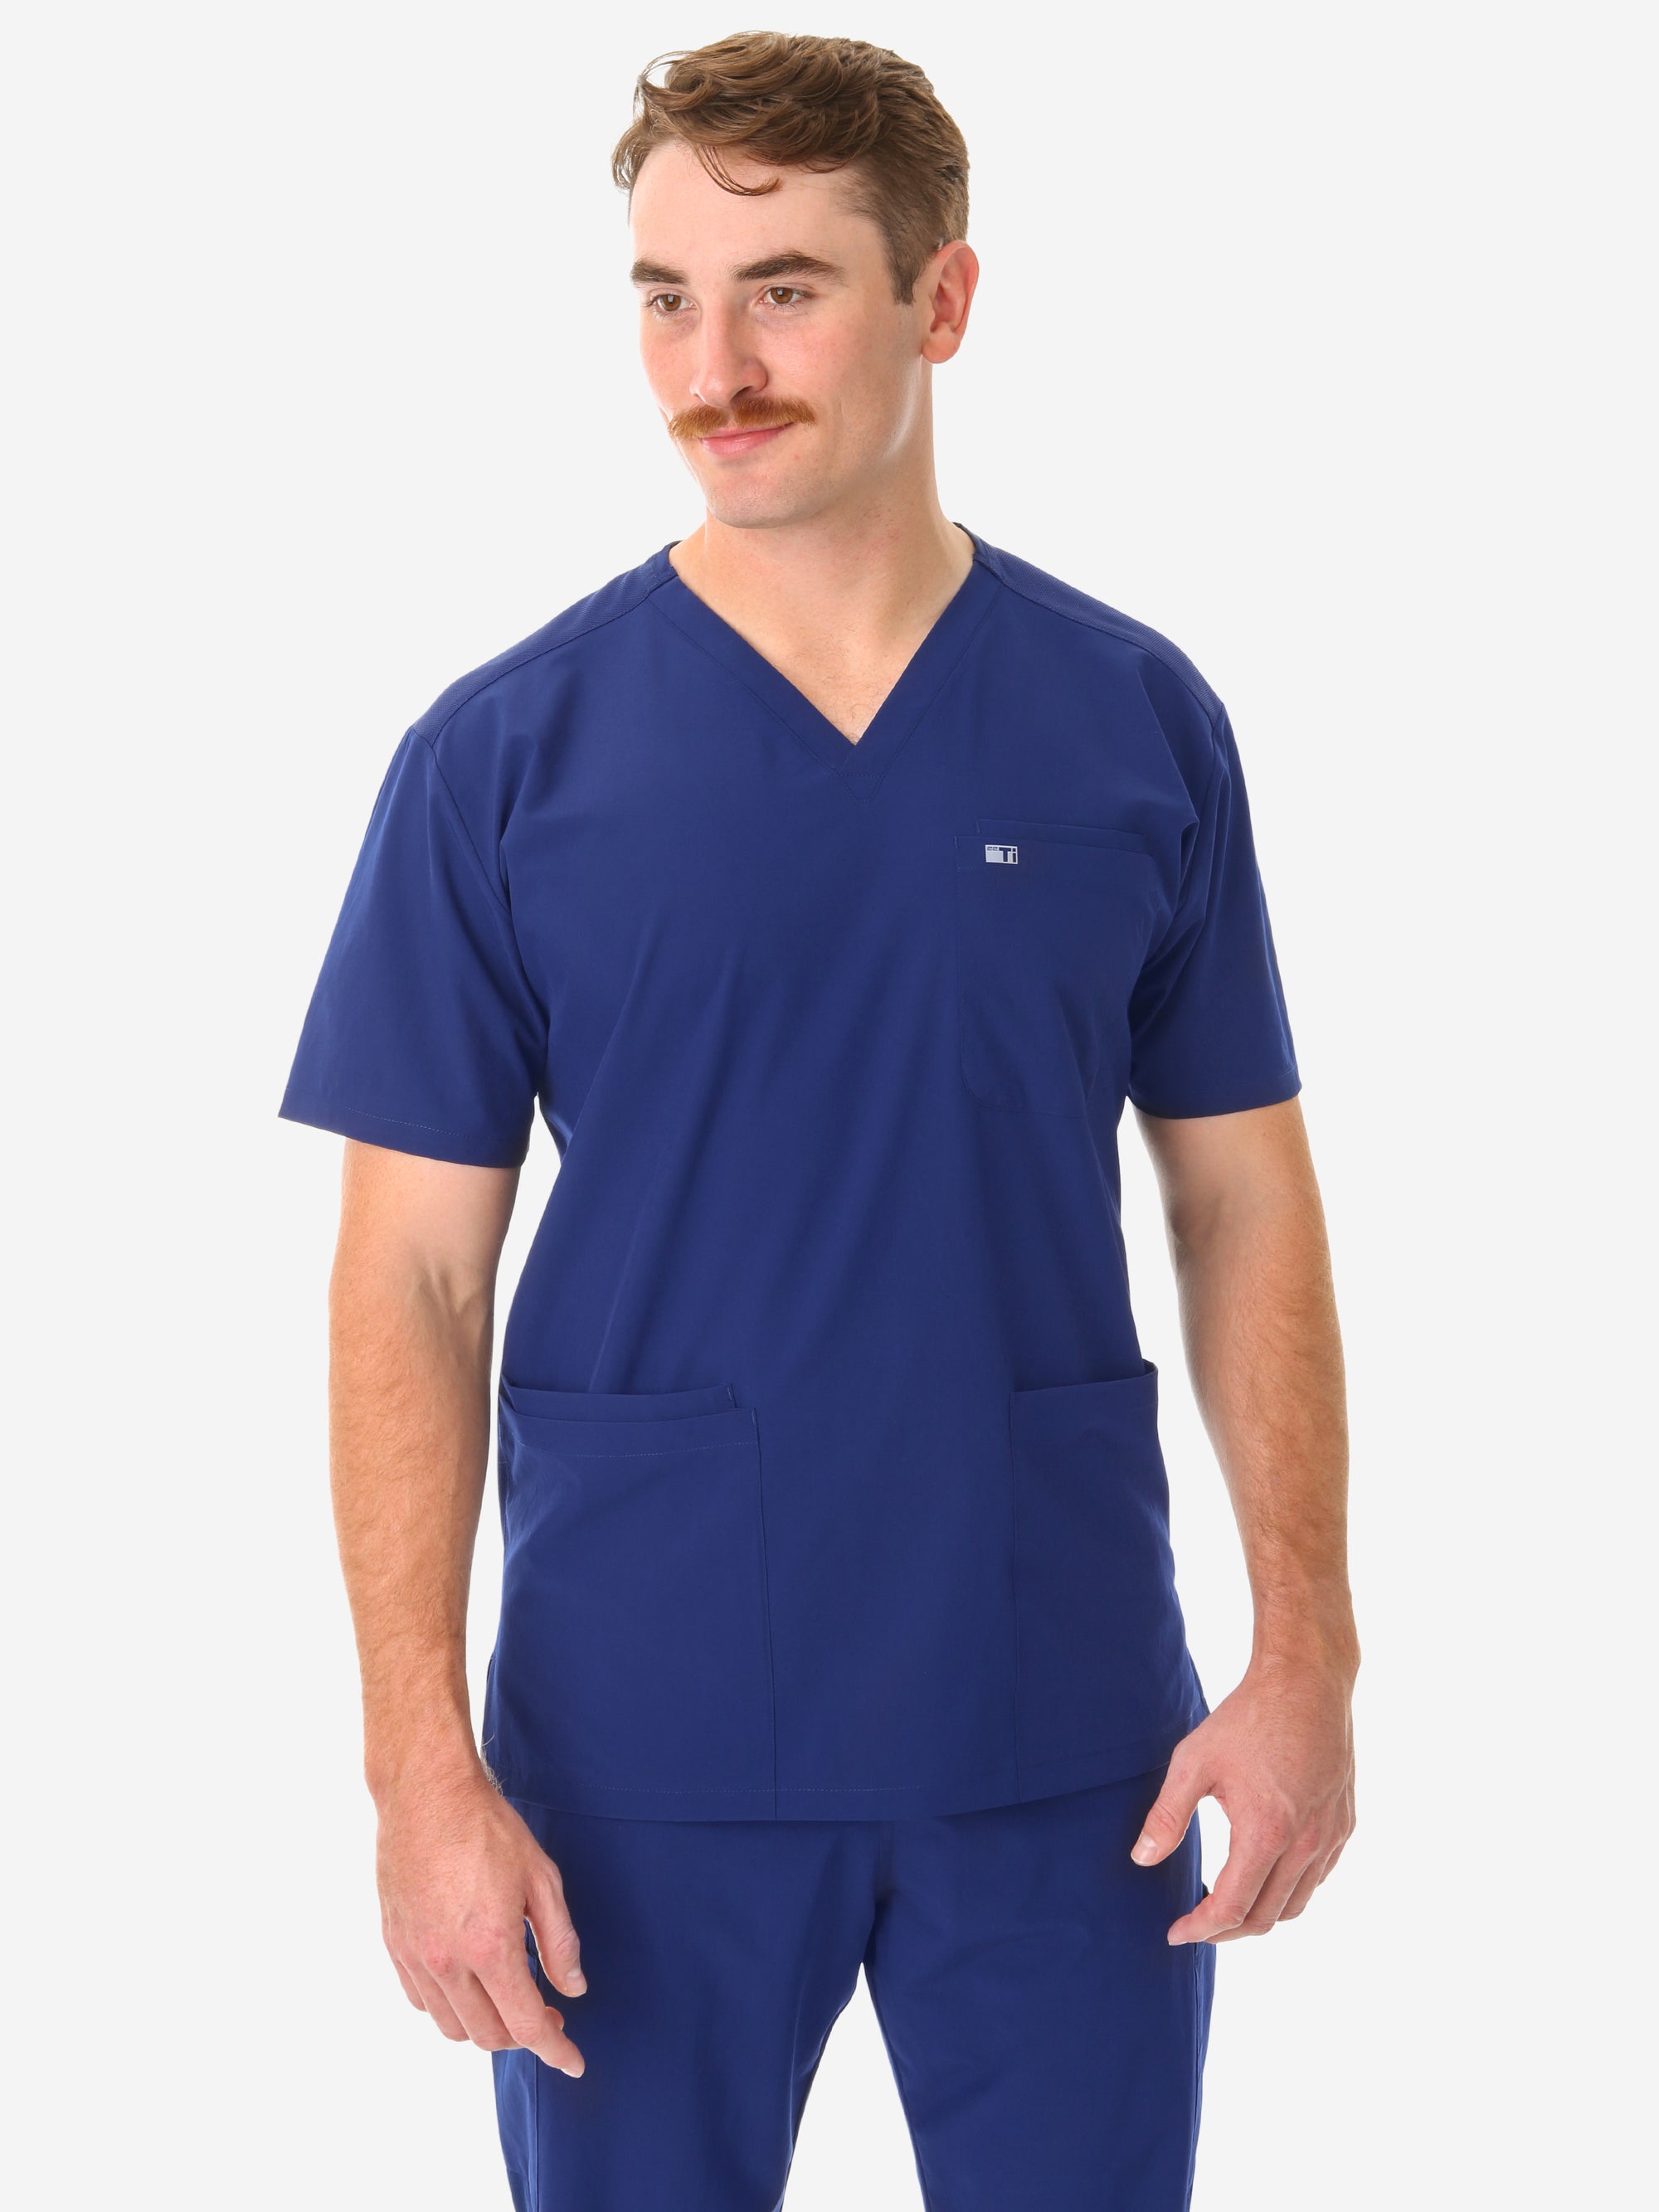 Men&#39;s Navy Blue Five-Pocket Scrub Top Only Front View